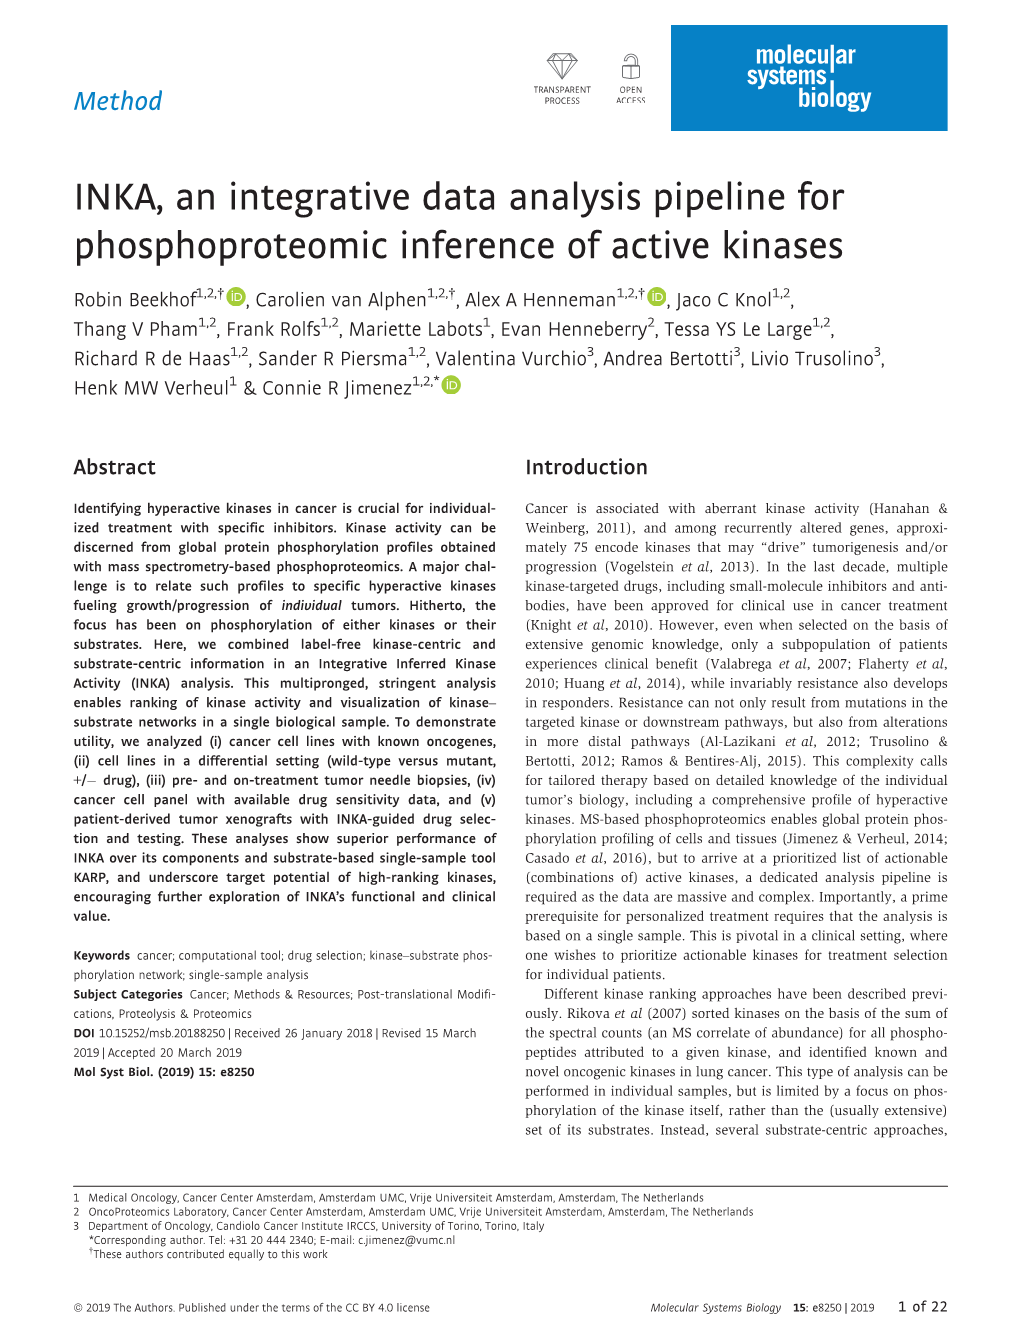 INKA, an Integrative Data Analysis Pipeline for Phosphoproteomic Inference of Active Kinases